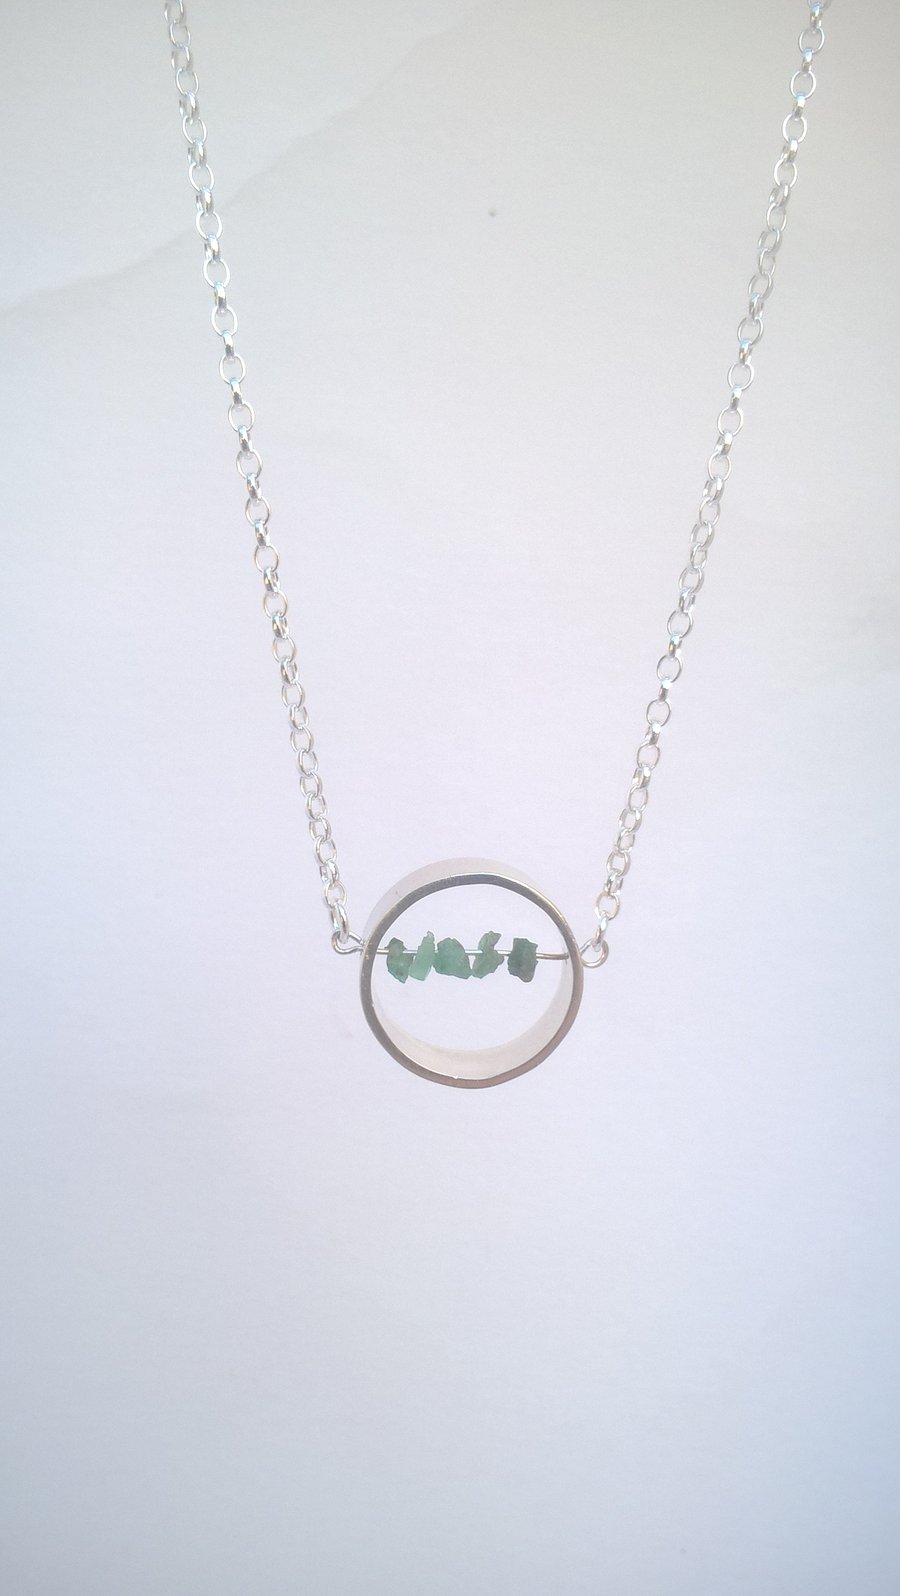 Emerald & Silver Ring Necklace